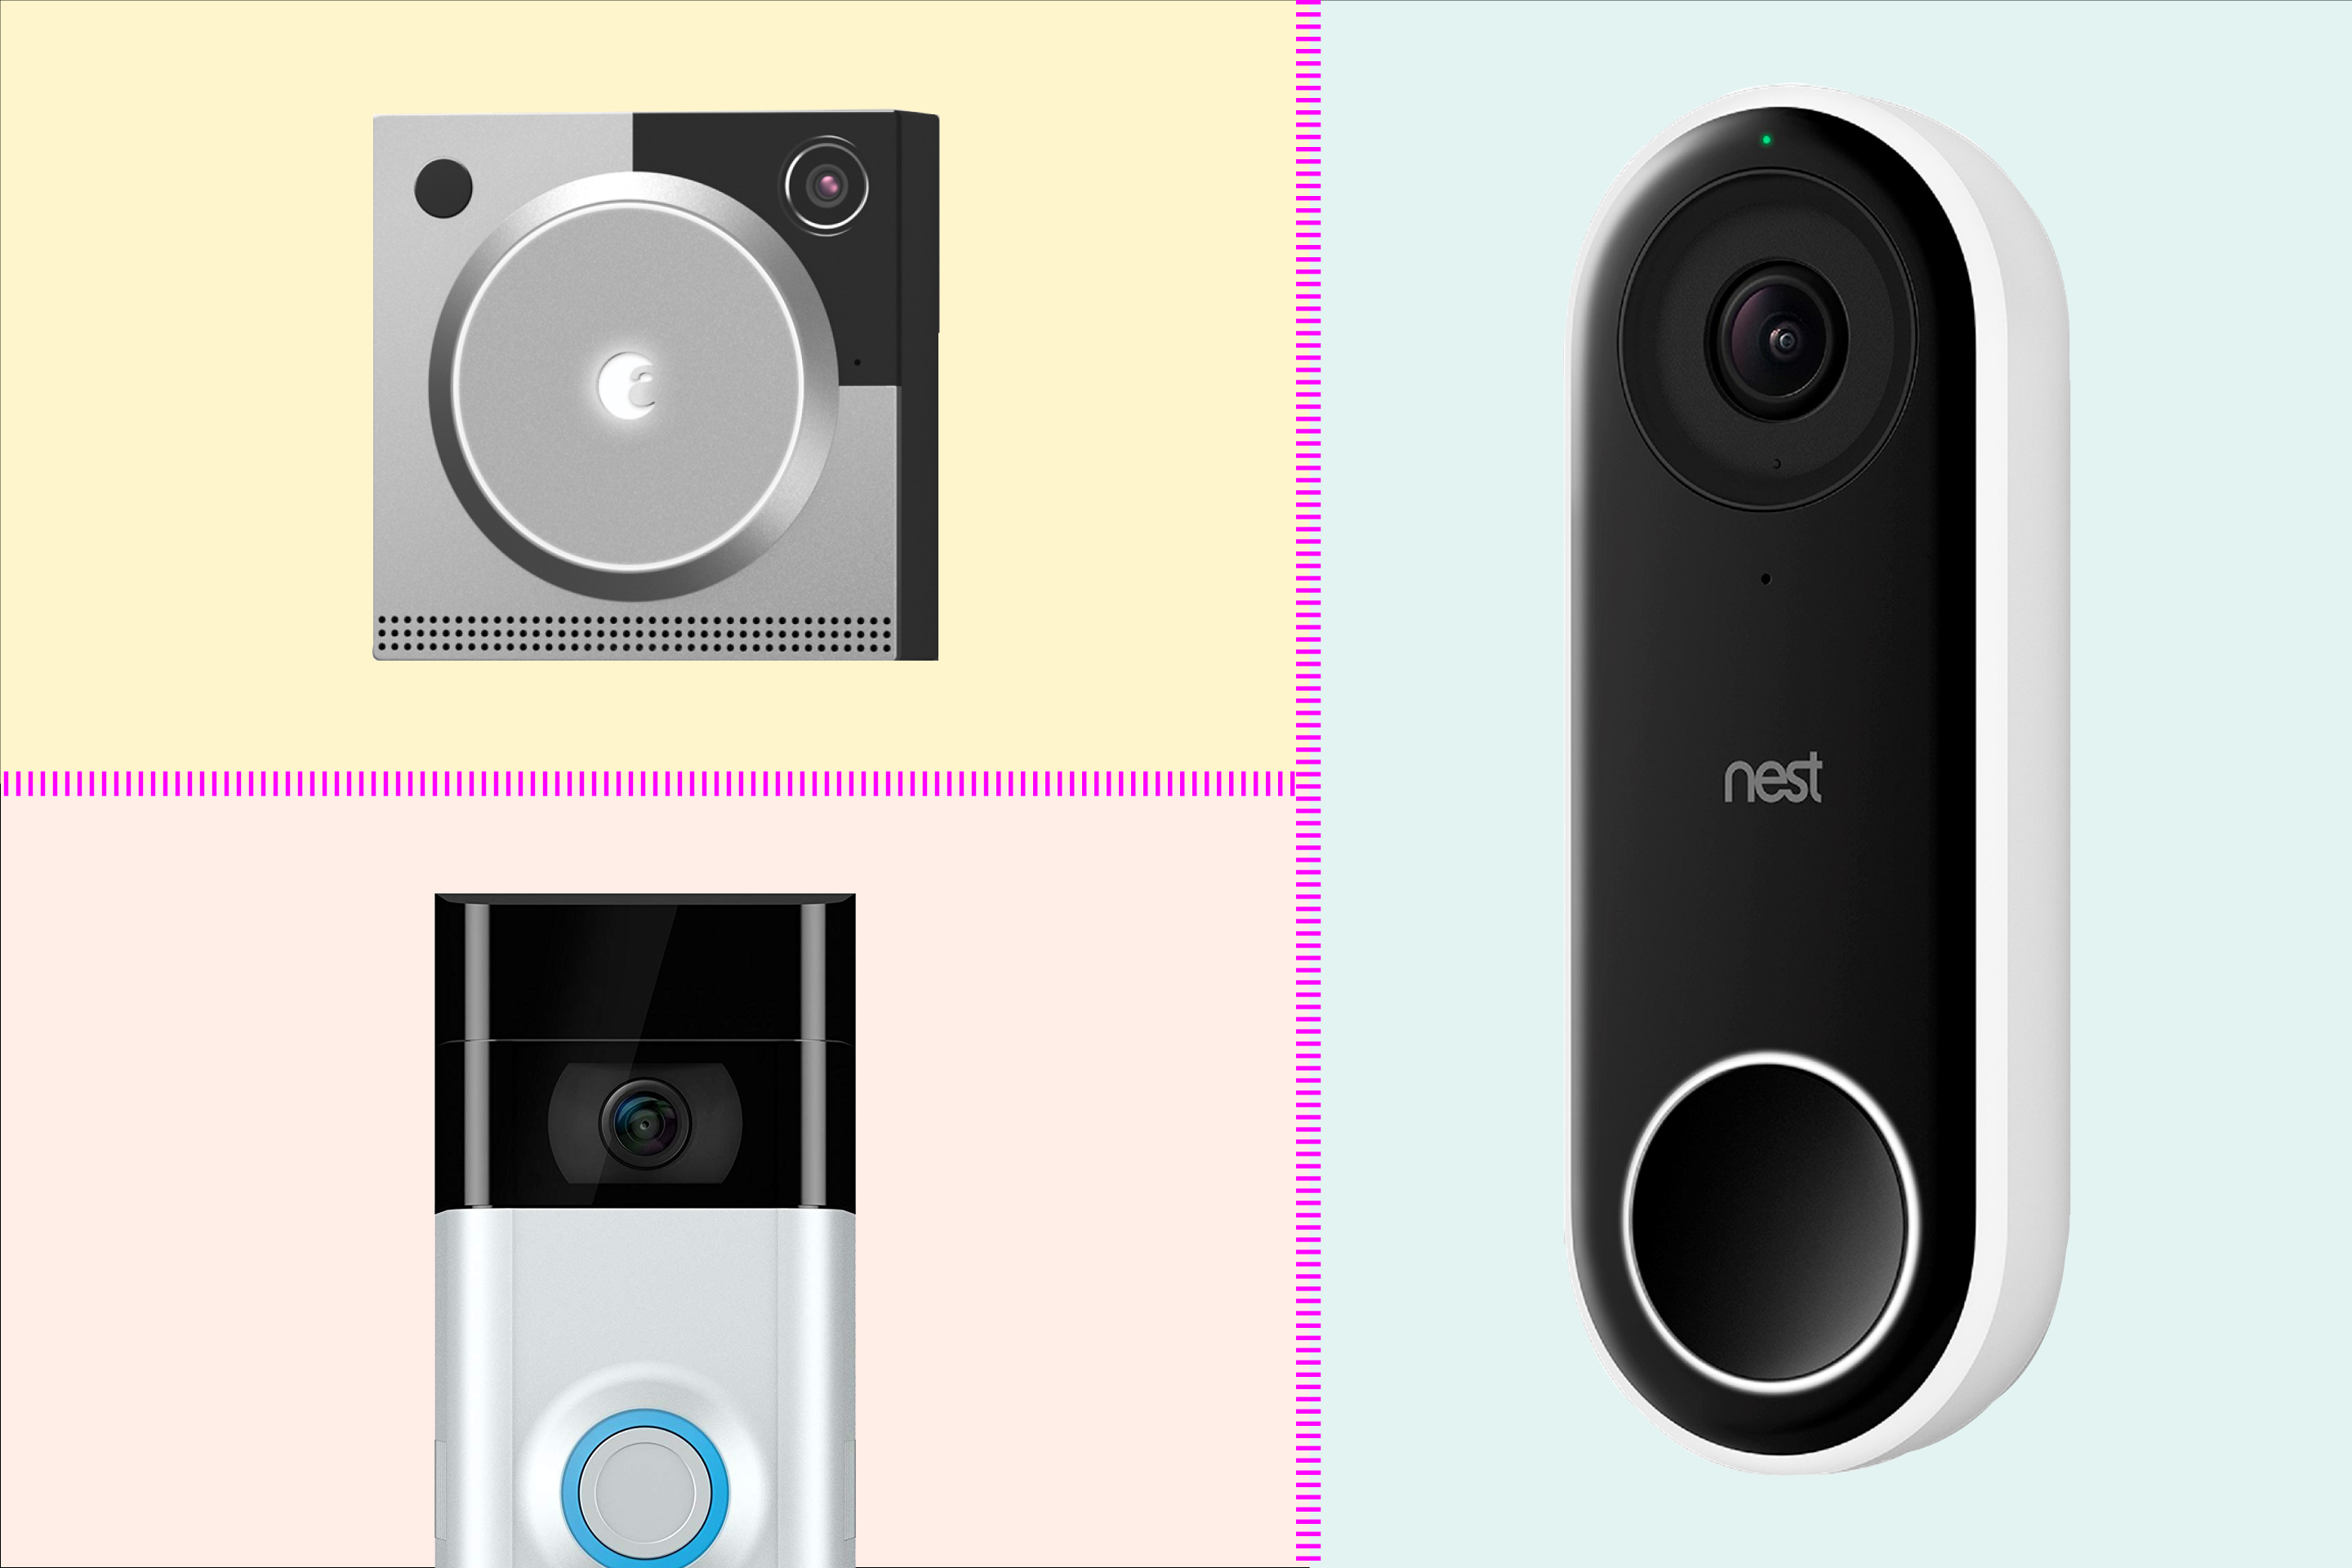 ring video doorbell compatible with google home